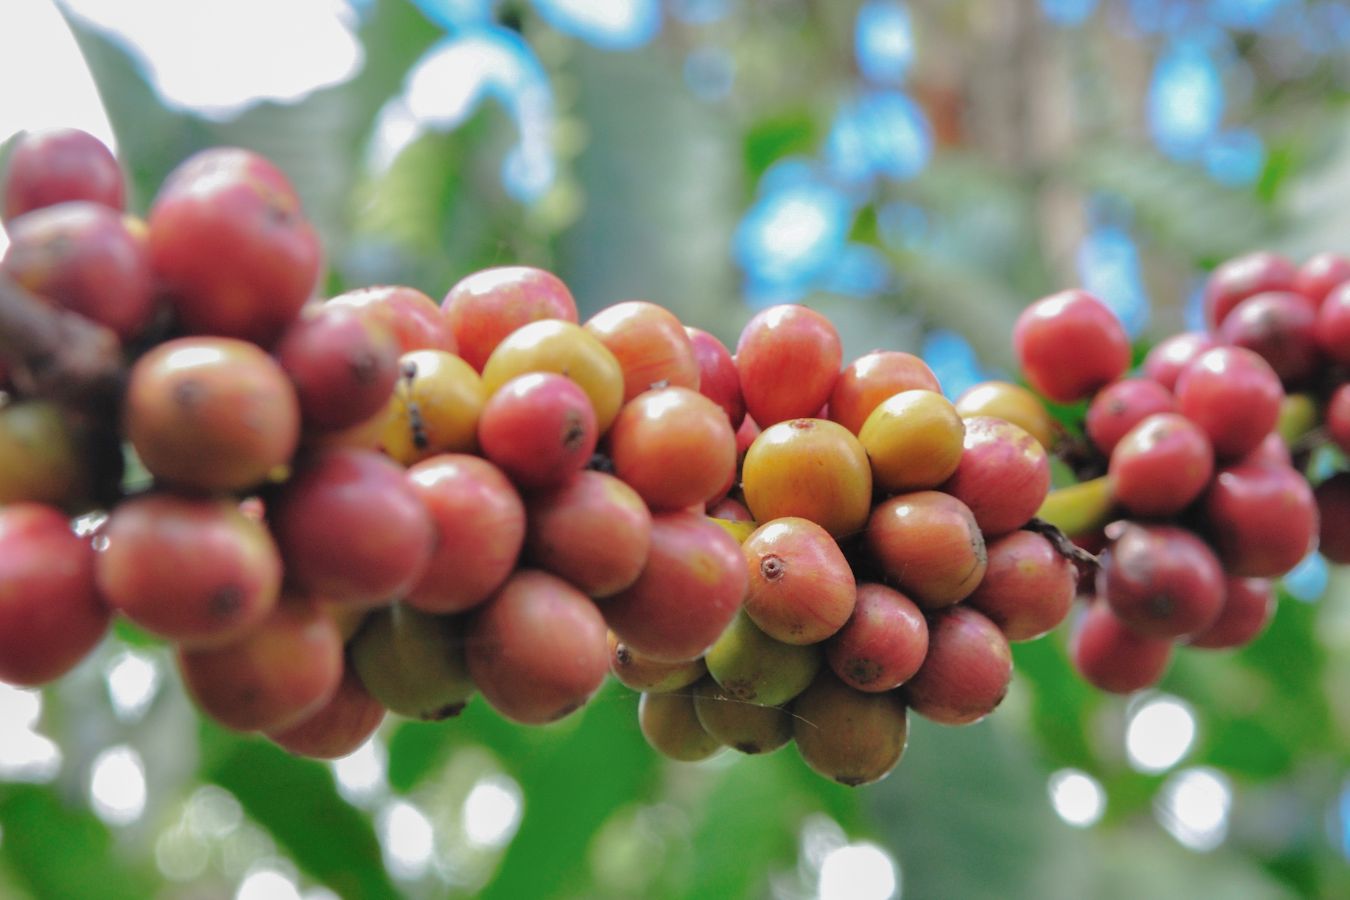 Coffee Price Today August 29, 2022: